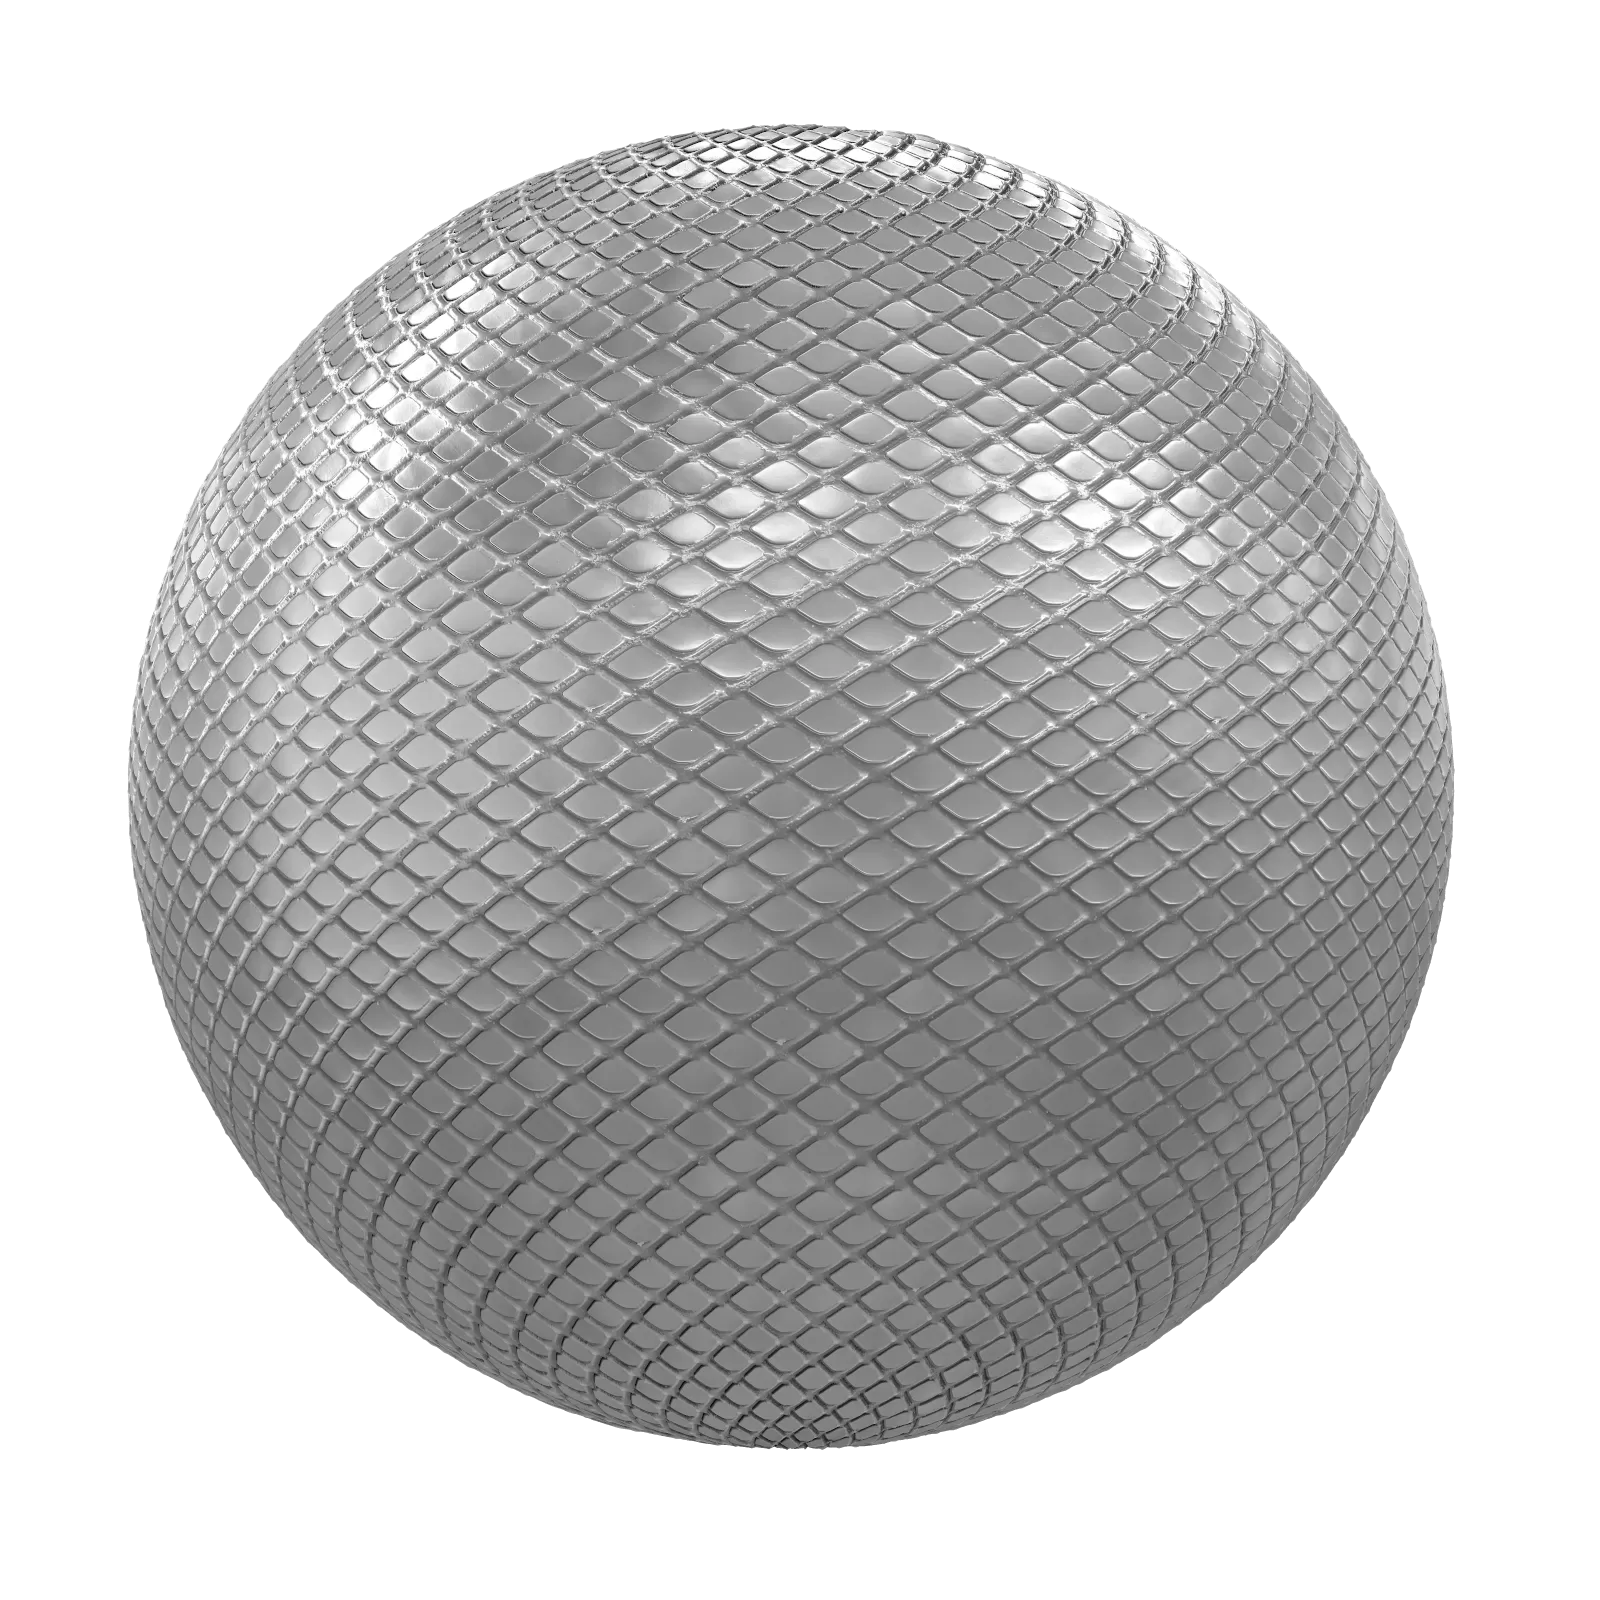 PBR CGAXIS TEXTURES – METALS – Patterned Shiny Metal 01